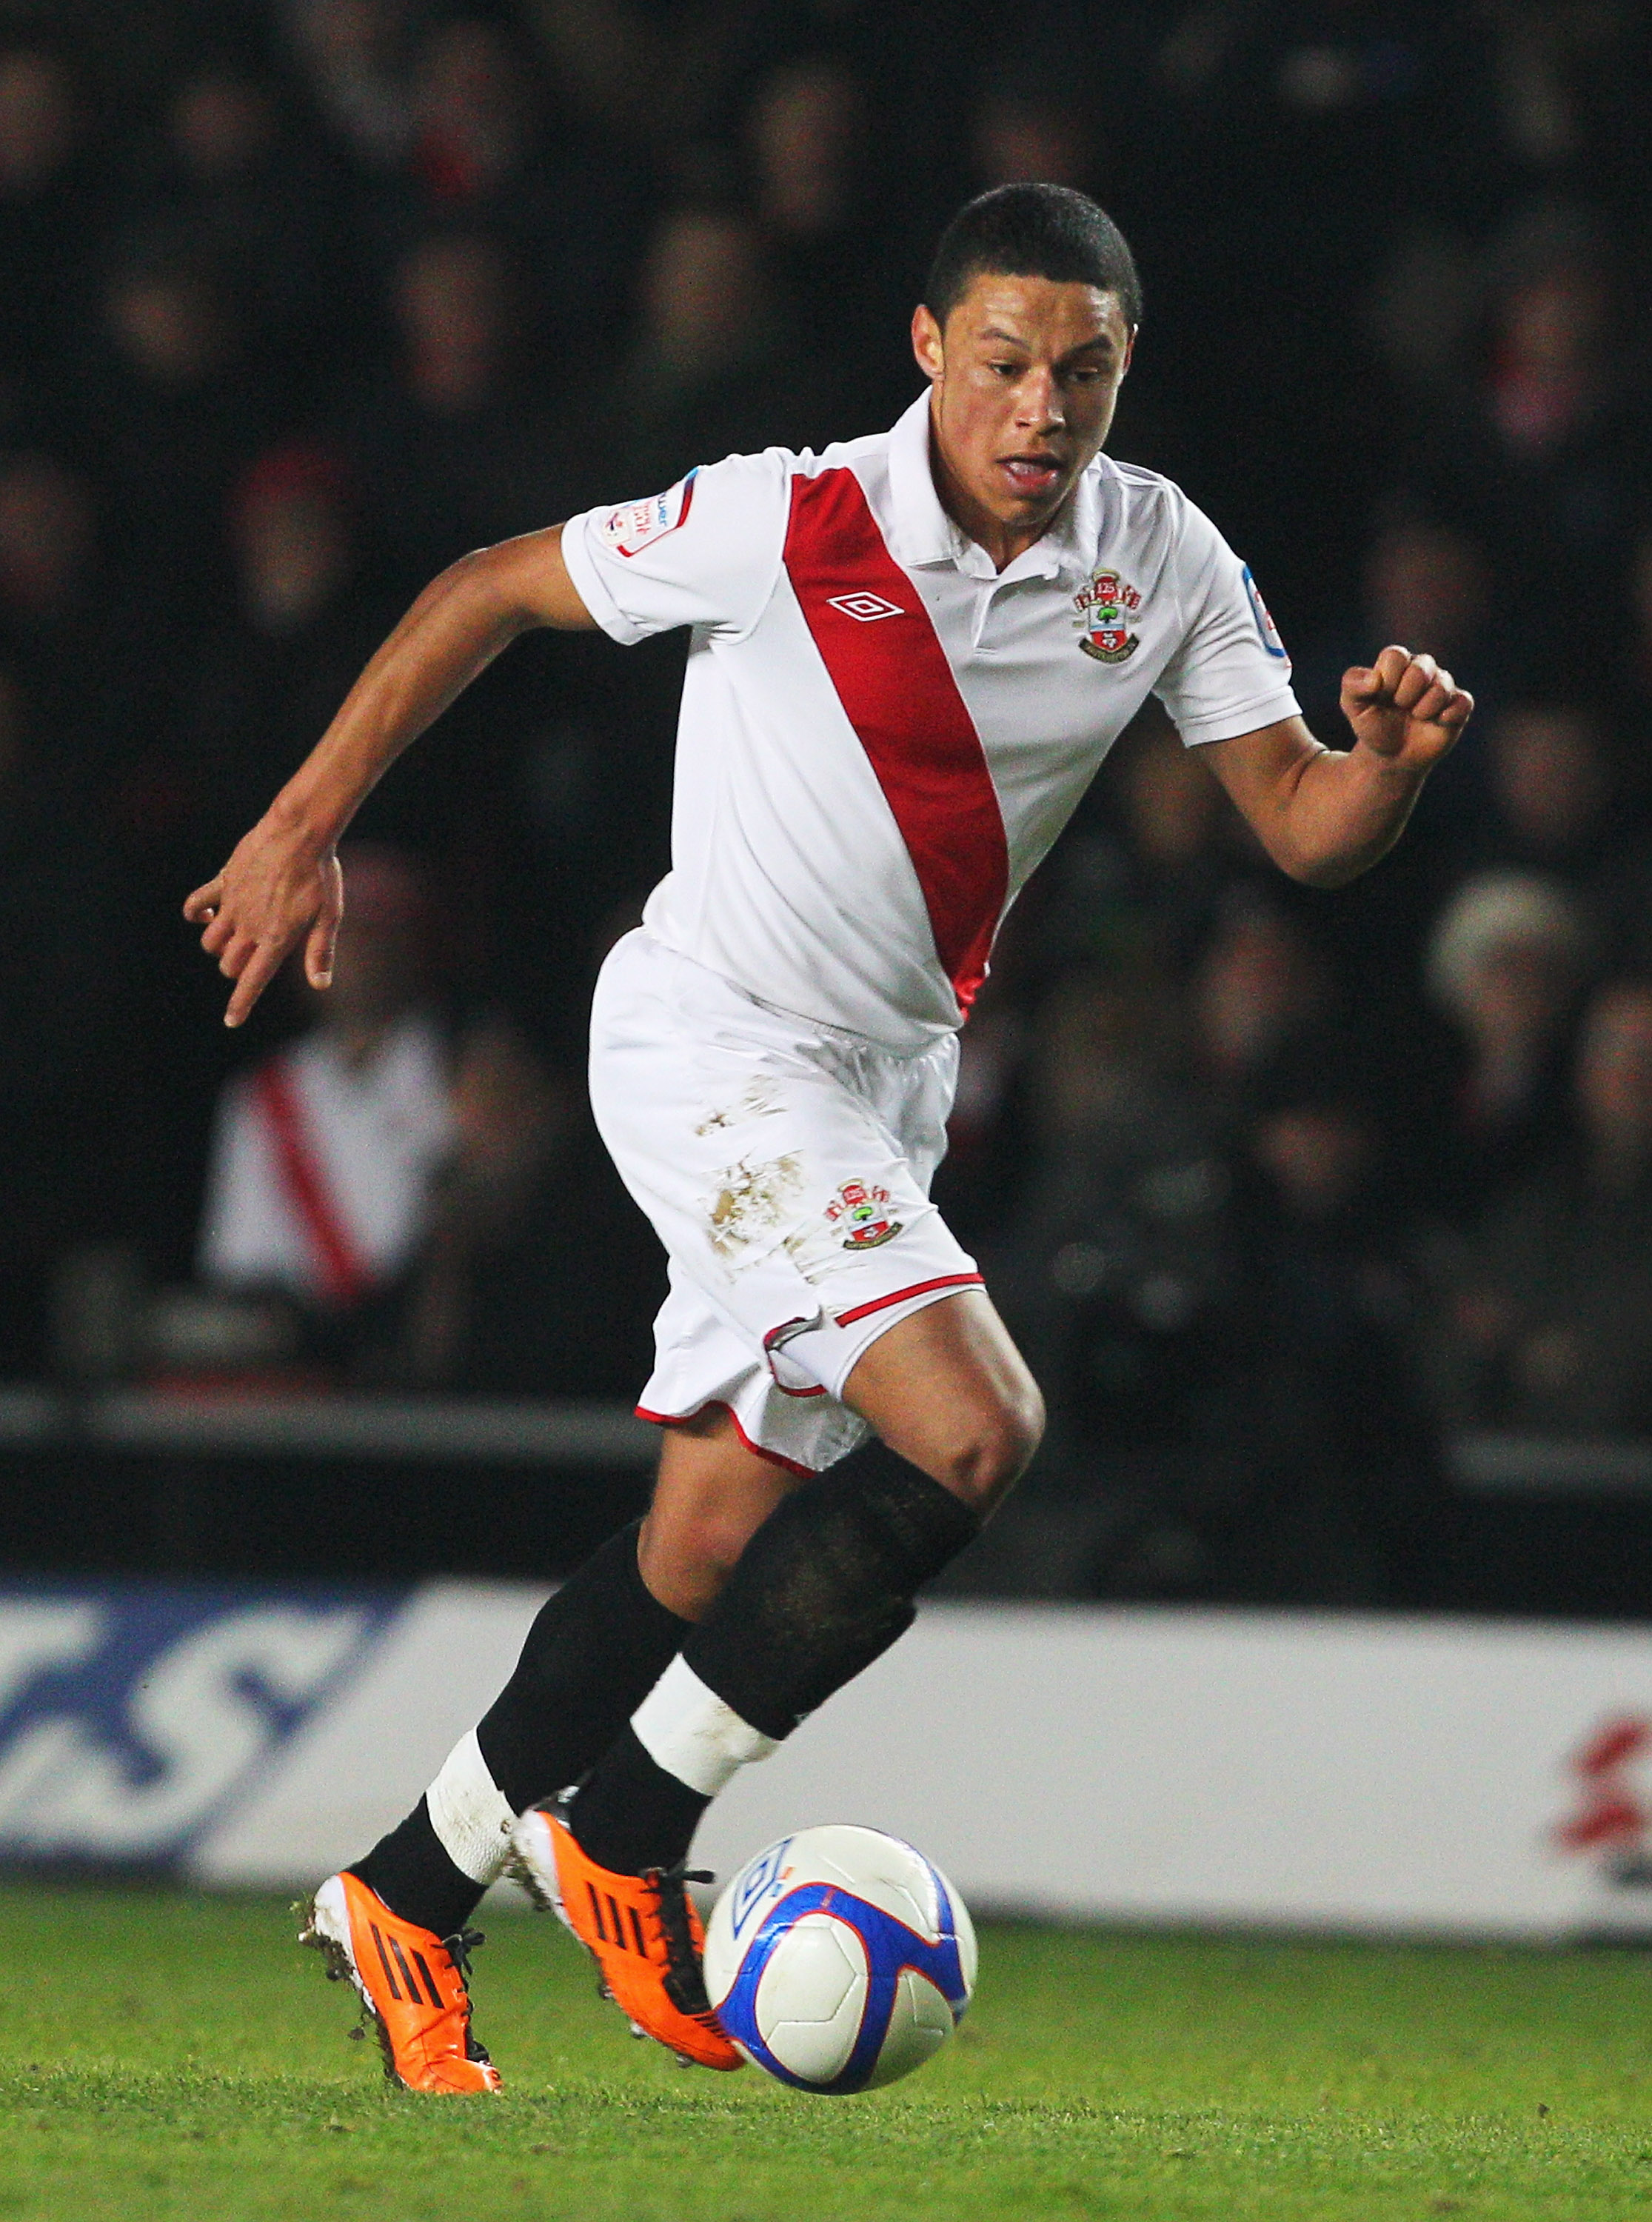 SOUTHAMPTON, ENGLAND - JANUARY 29: Alex Chamberlain of Southampton in action during the FA Cup sponsored by E.ON 4th Round match between Southampton and Manchester United at St Mary's Stadium on January 29, 2011 in Southampton, England.  (Photo by Clive R